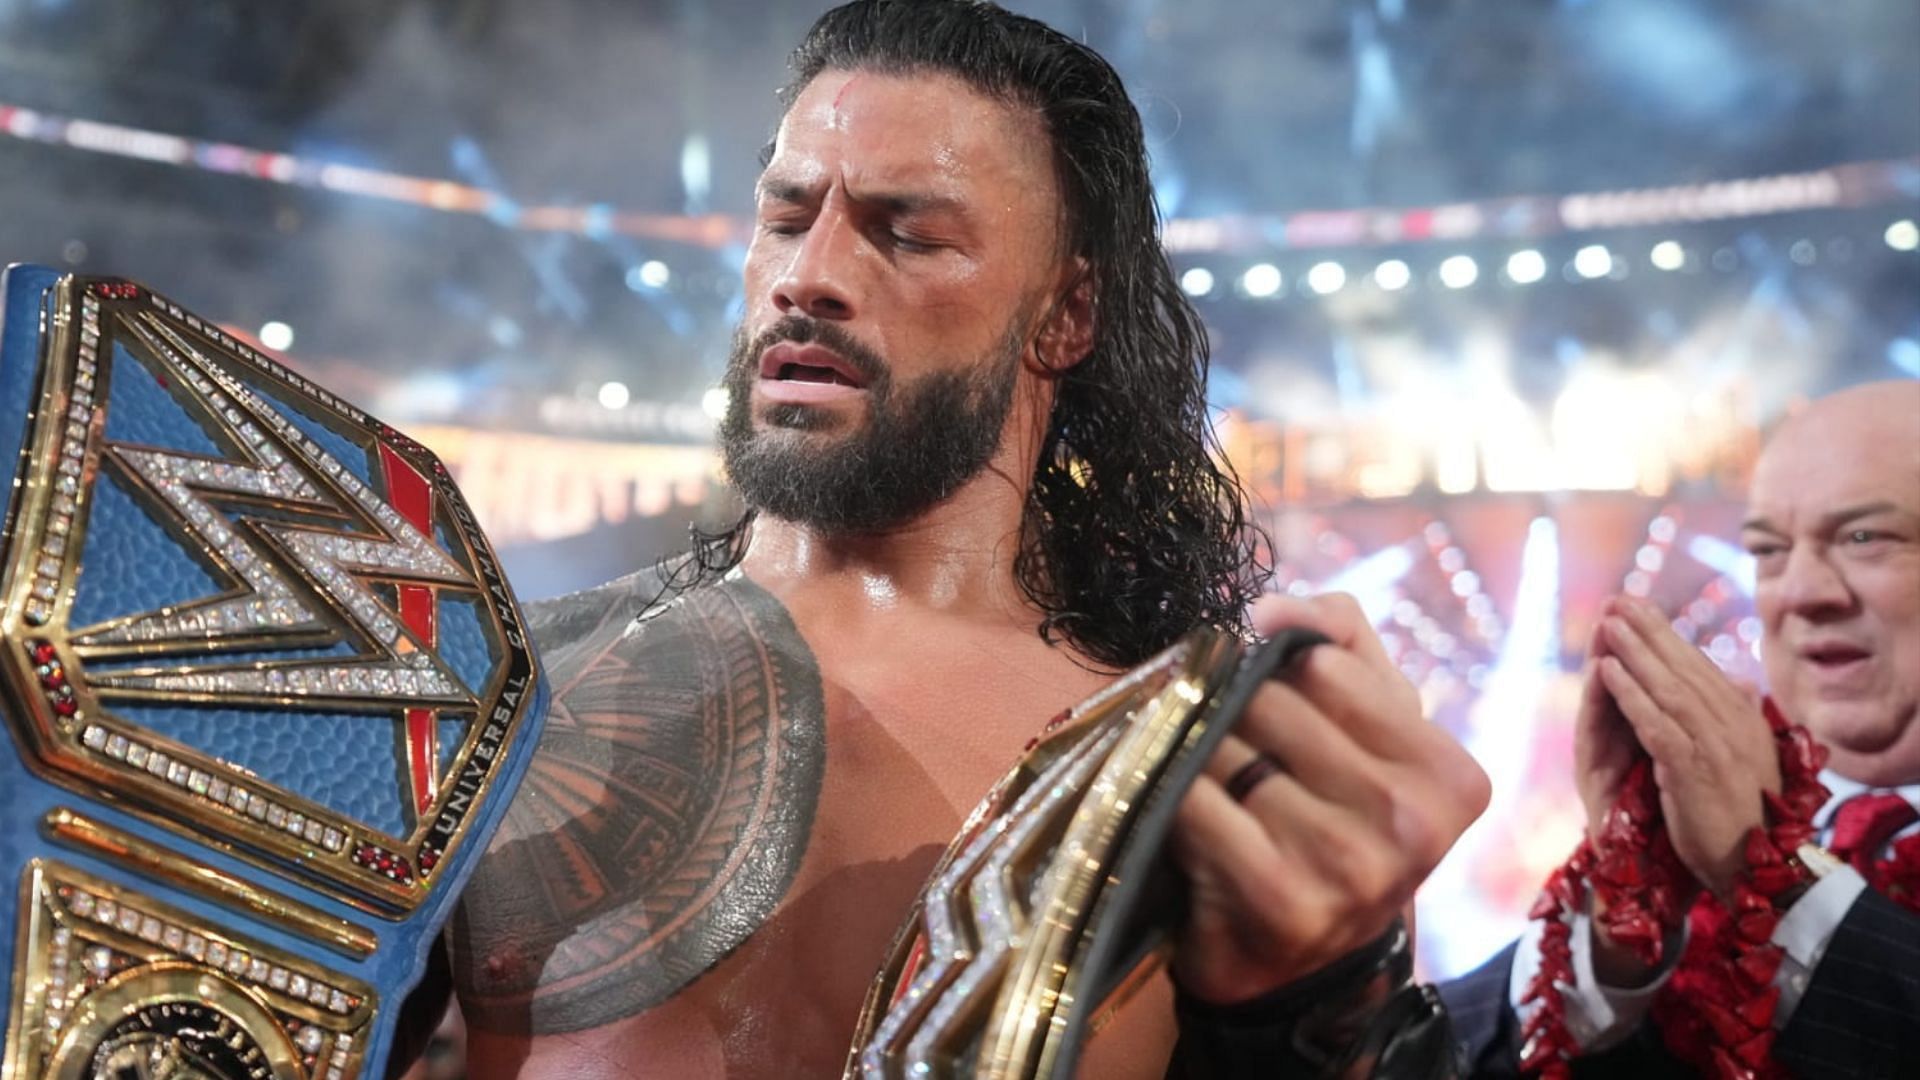 Update on WWE's plans for Roman Reigns title reign - Reports